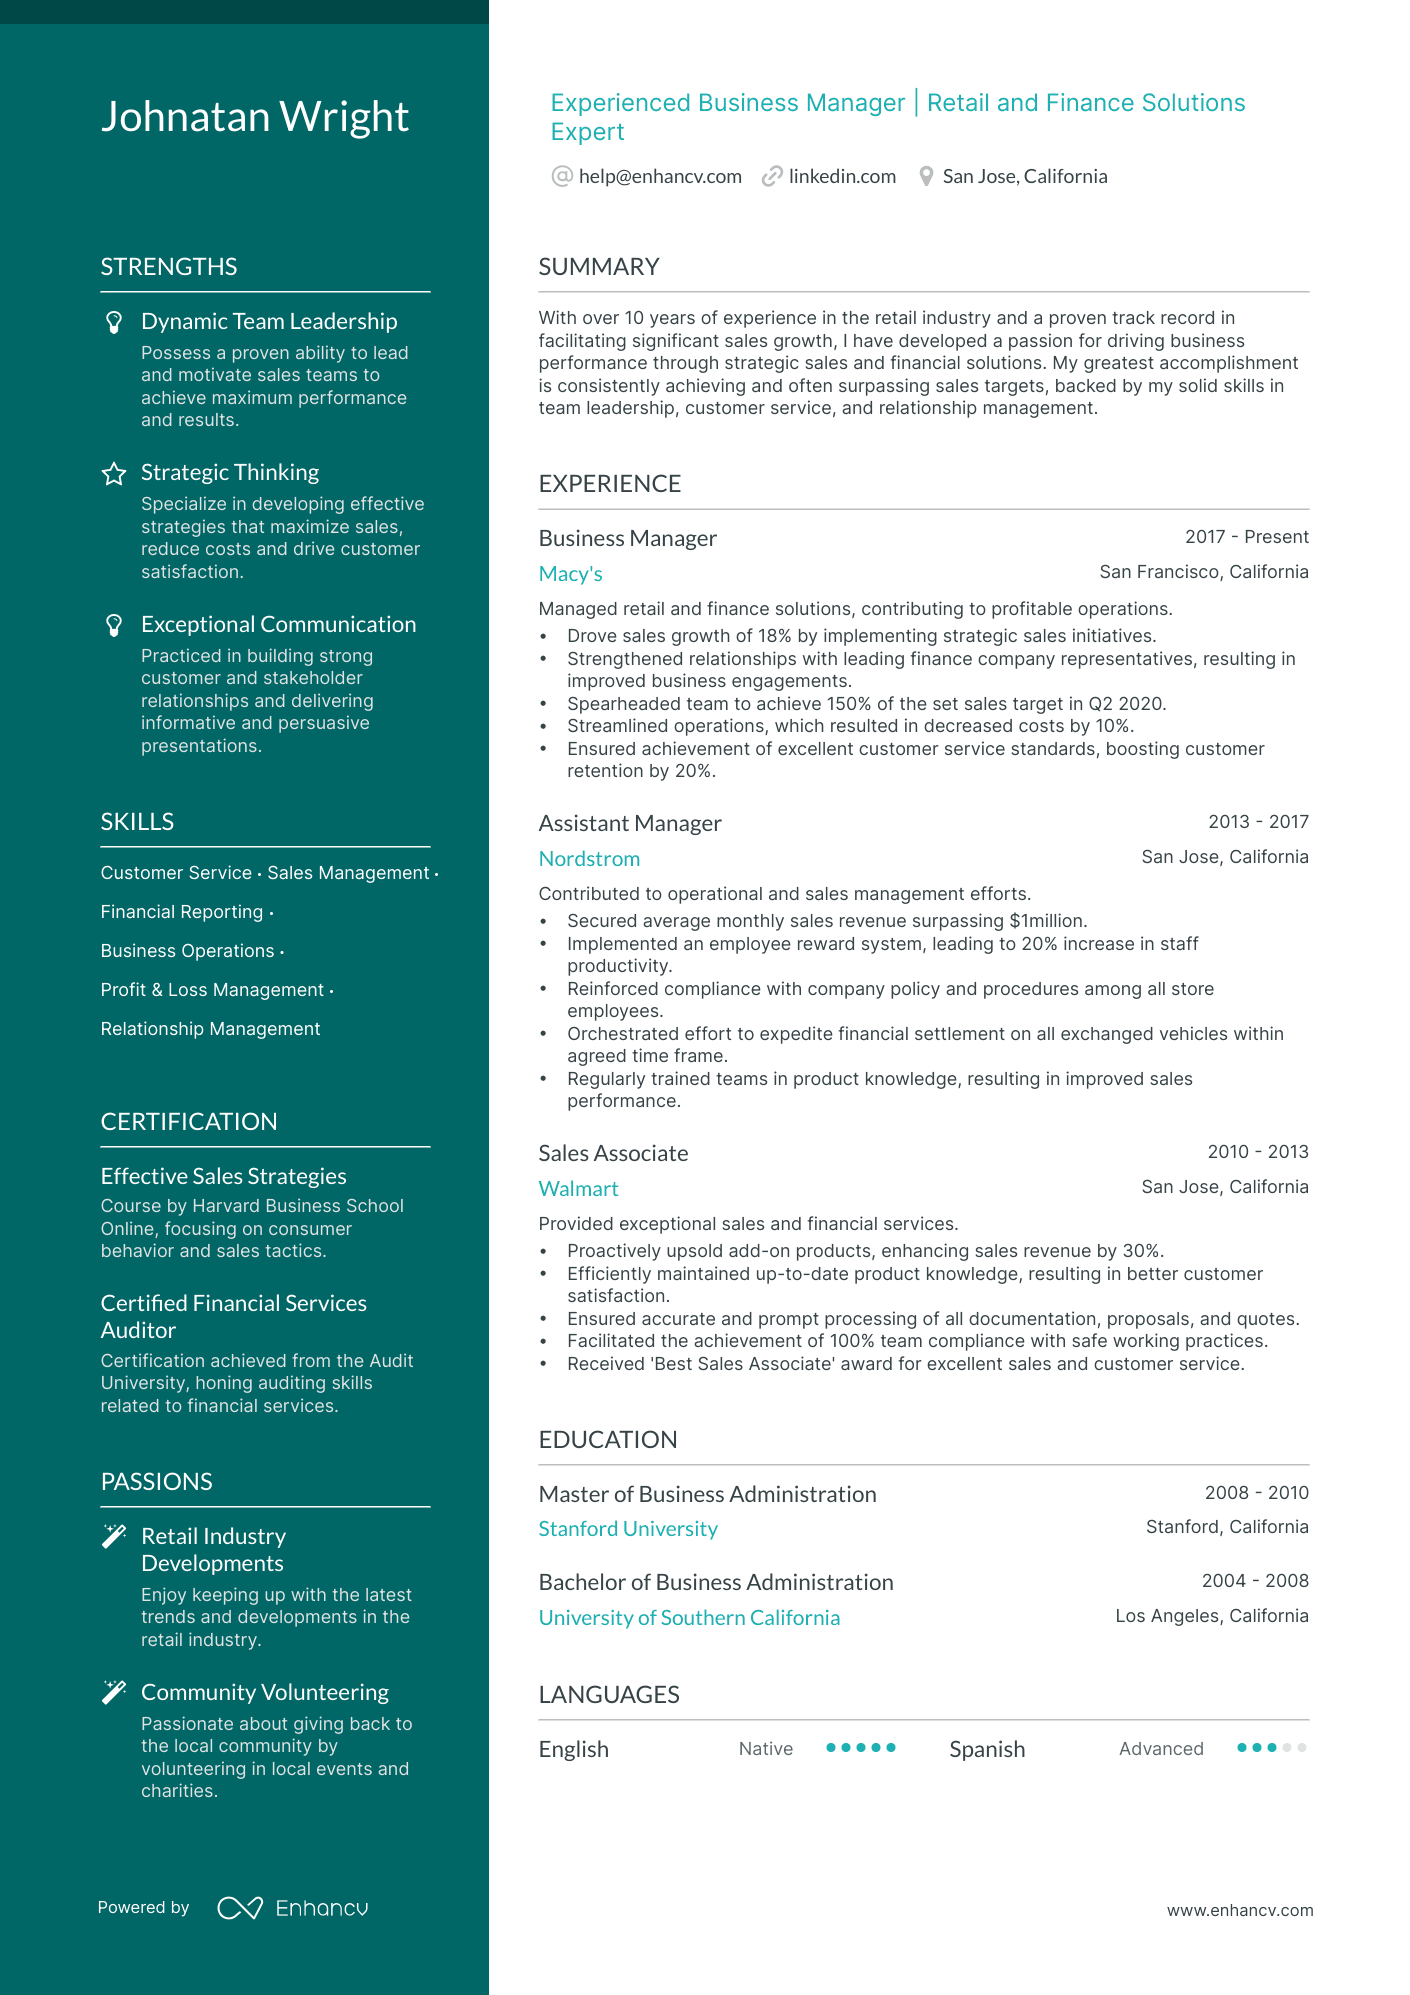 Business Manager resume example